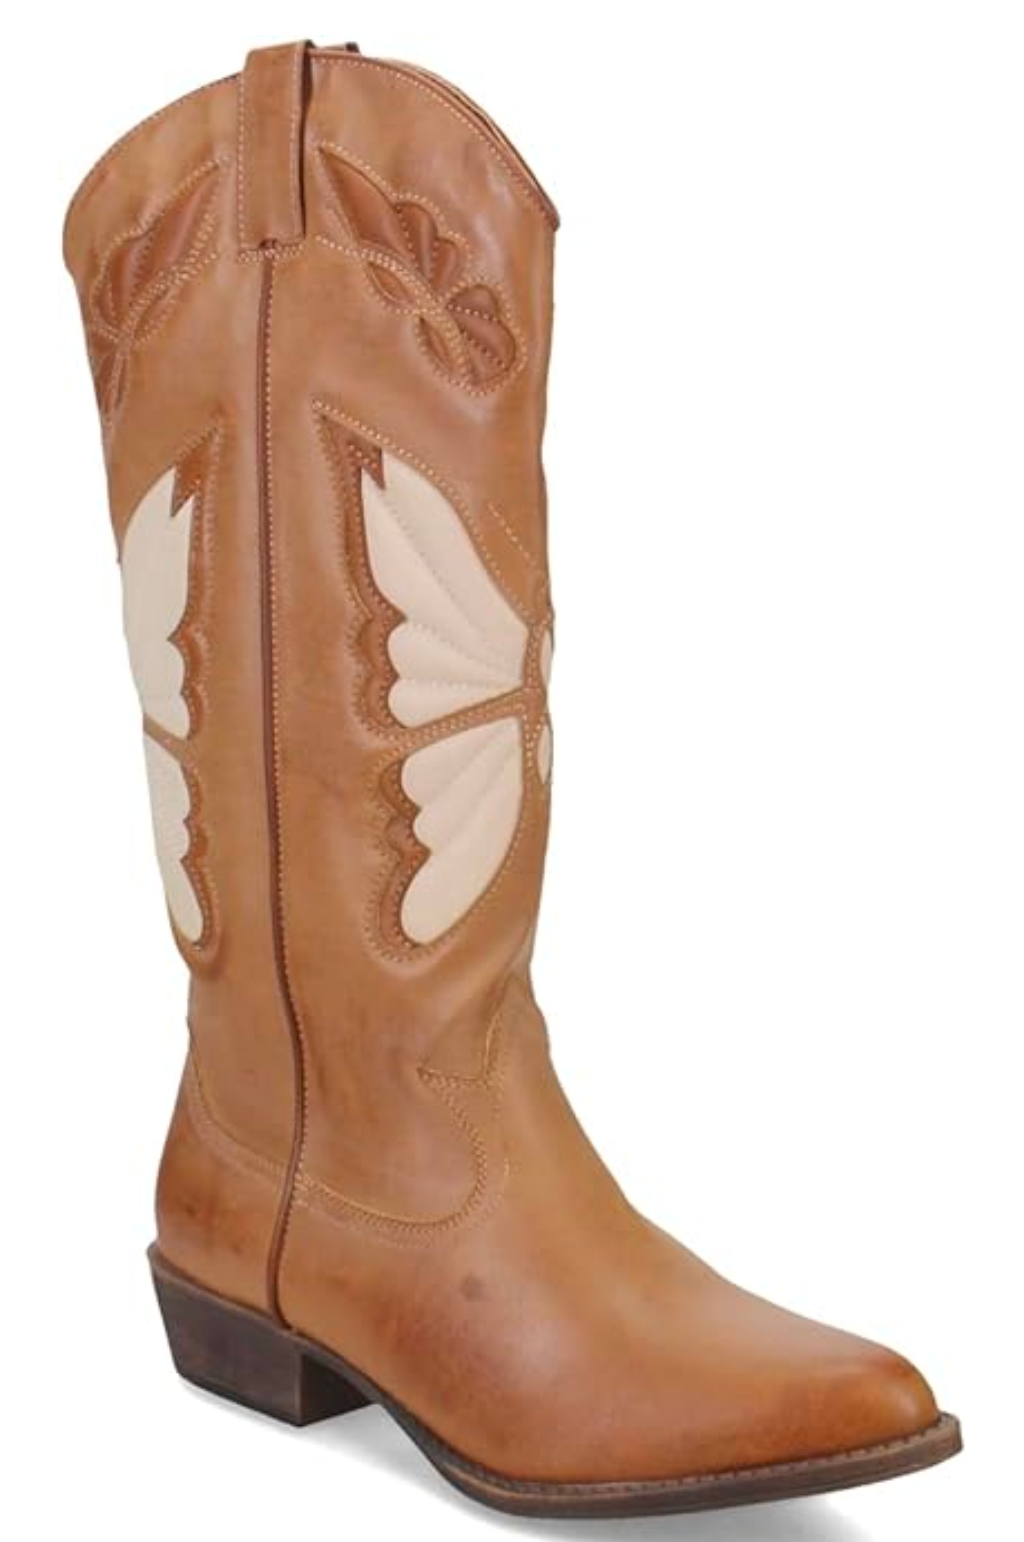 Mariposa Butterfly Western Boot - SoSis